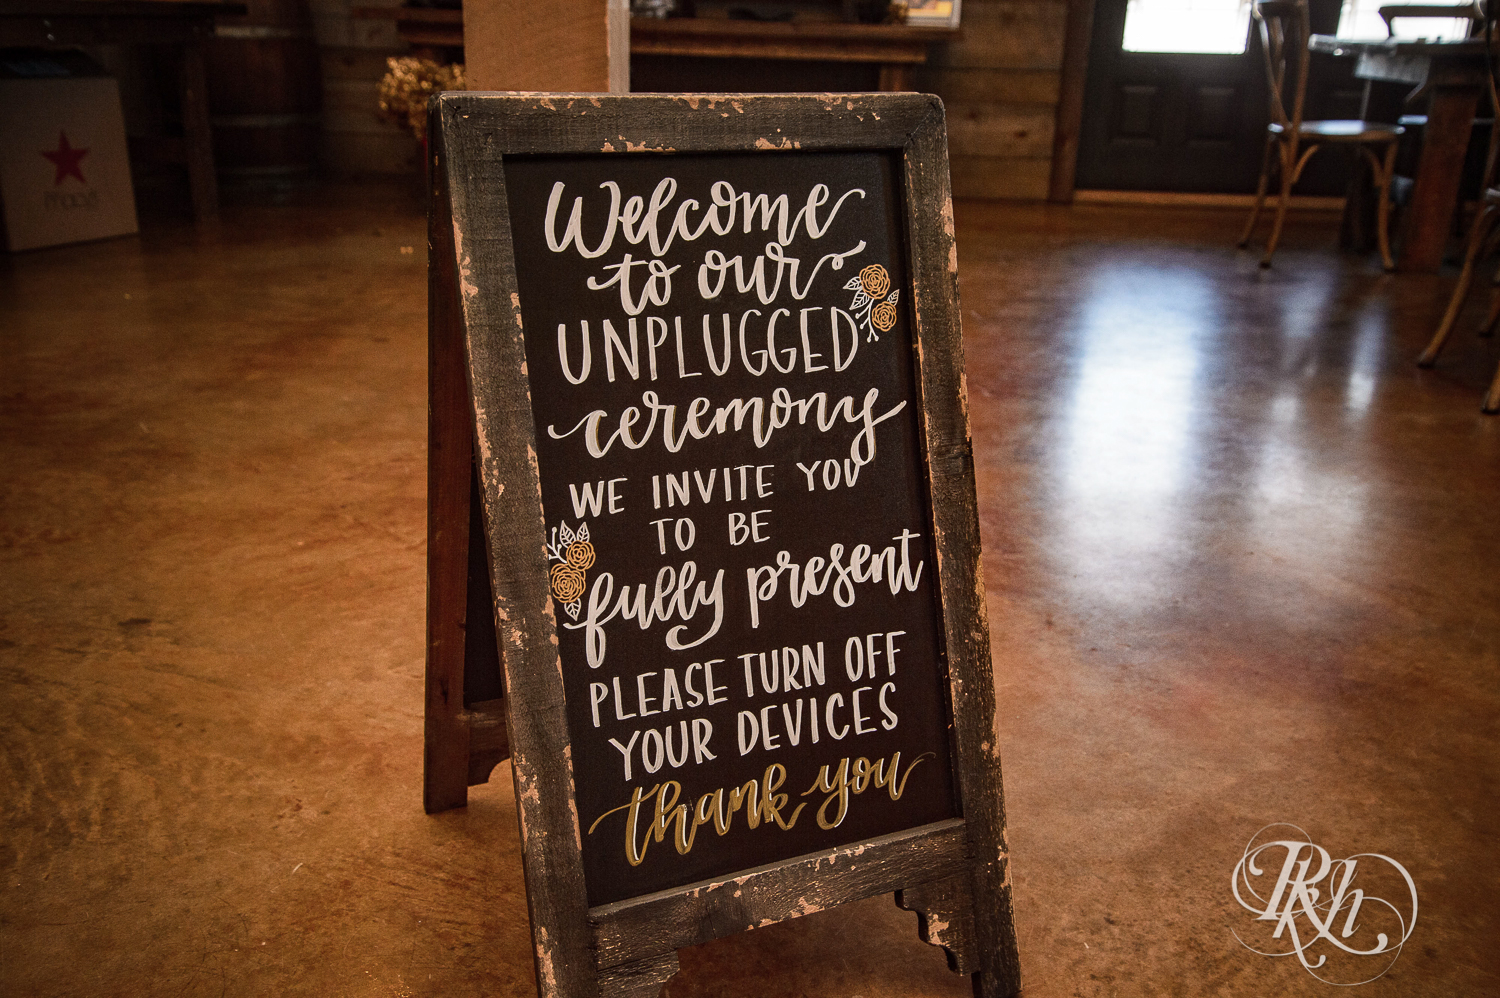 Unplugged ceremony sign at a wedding.